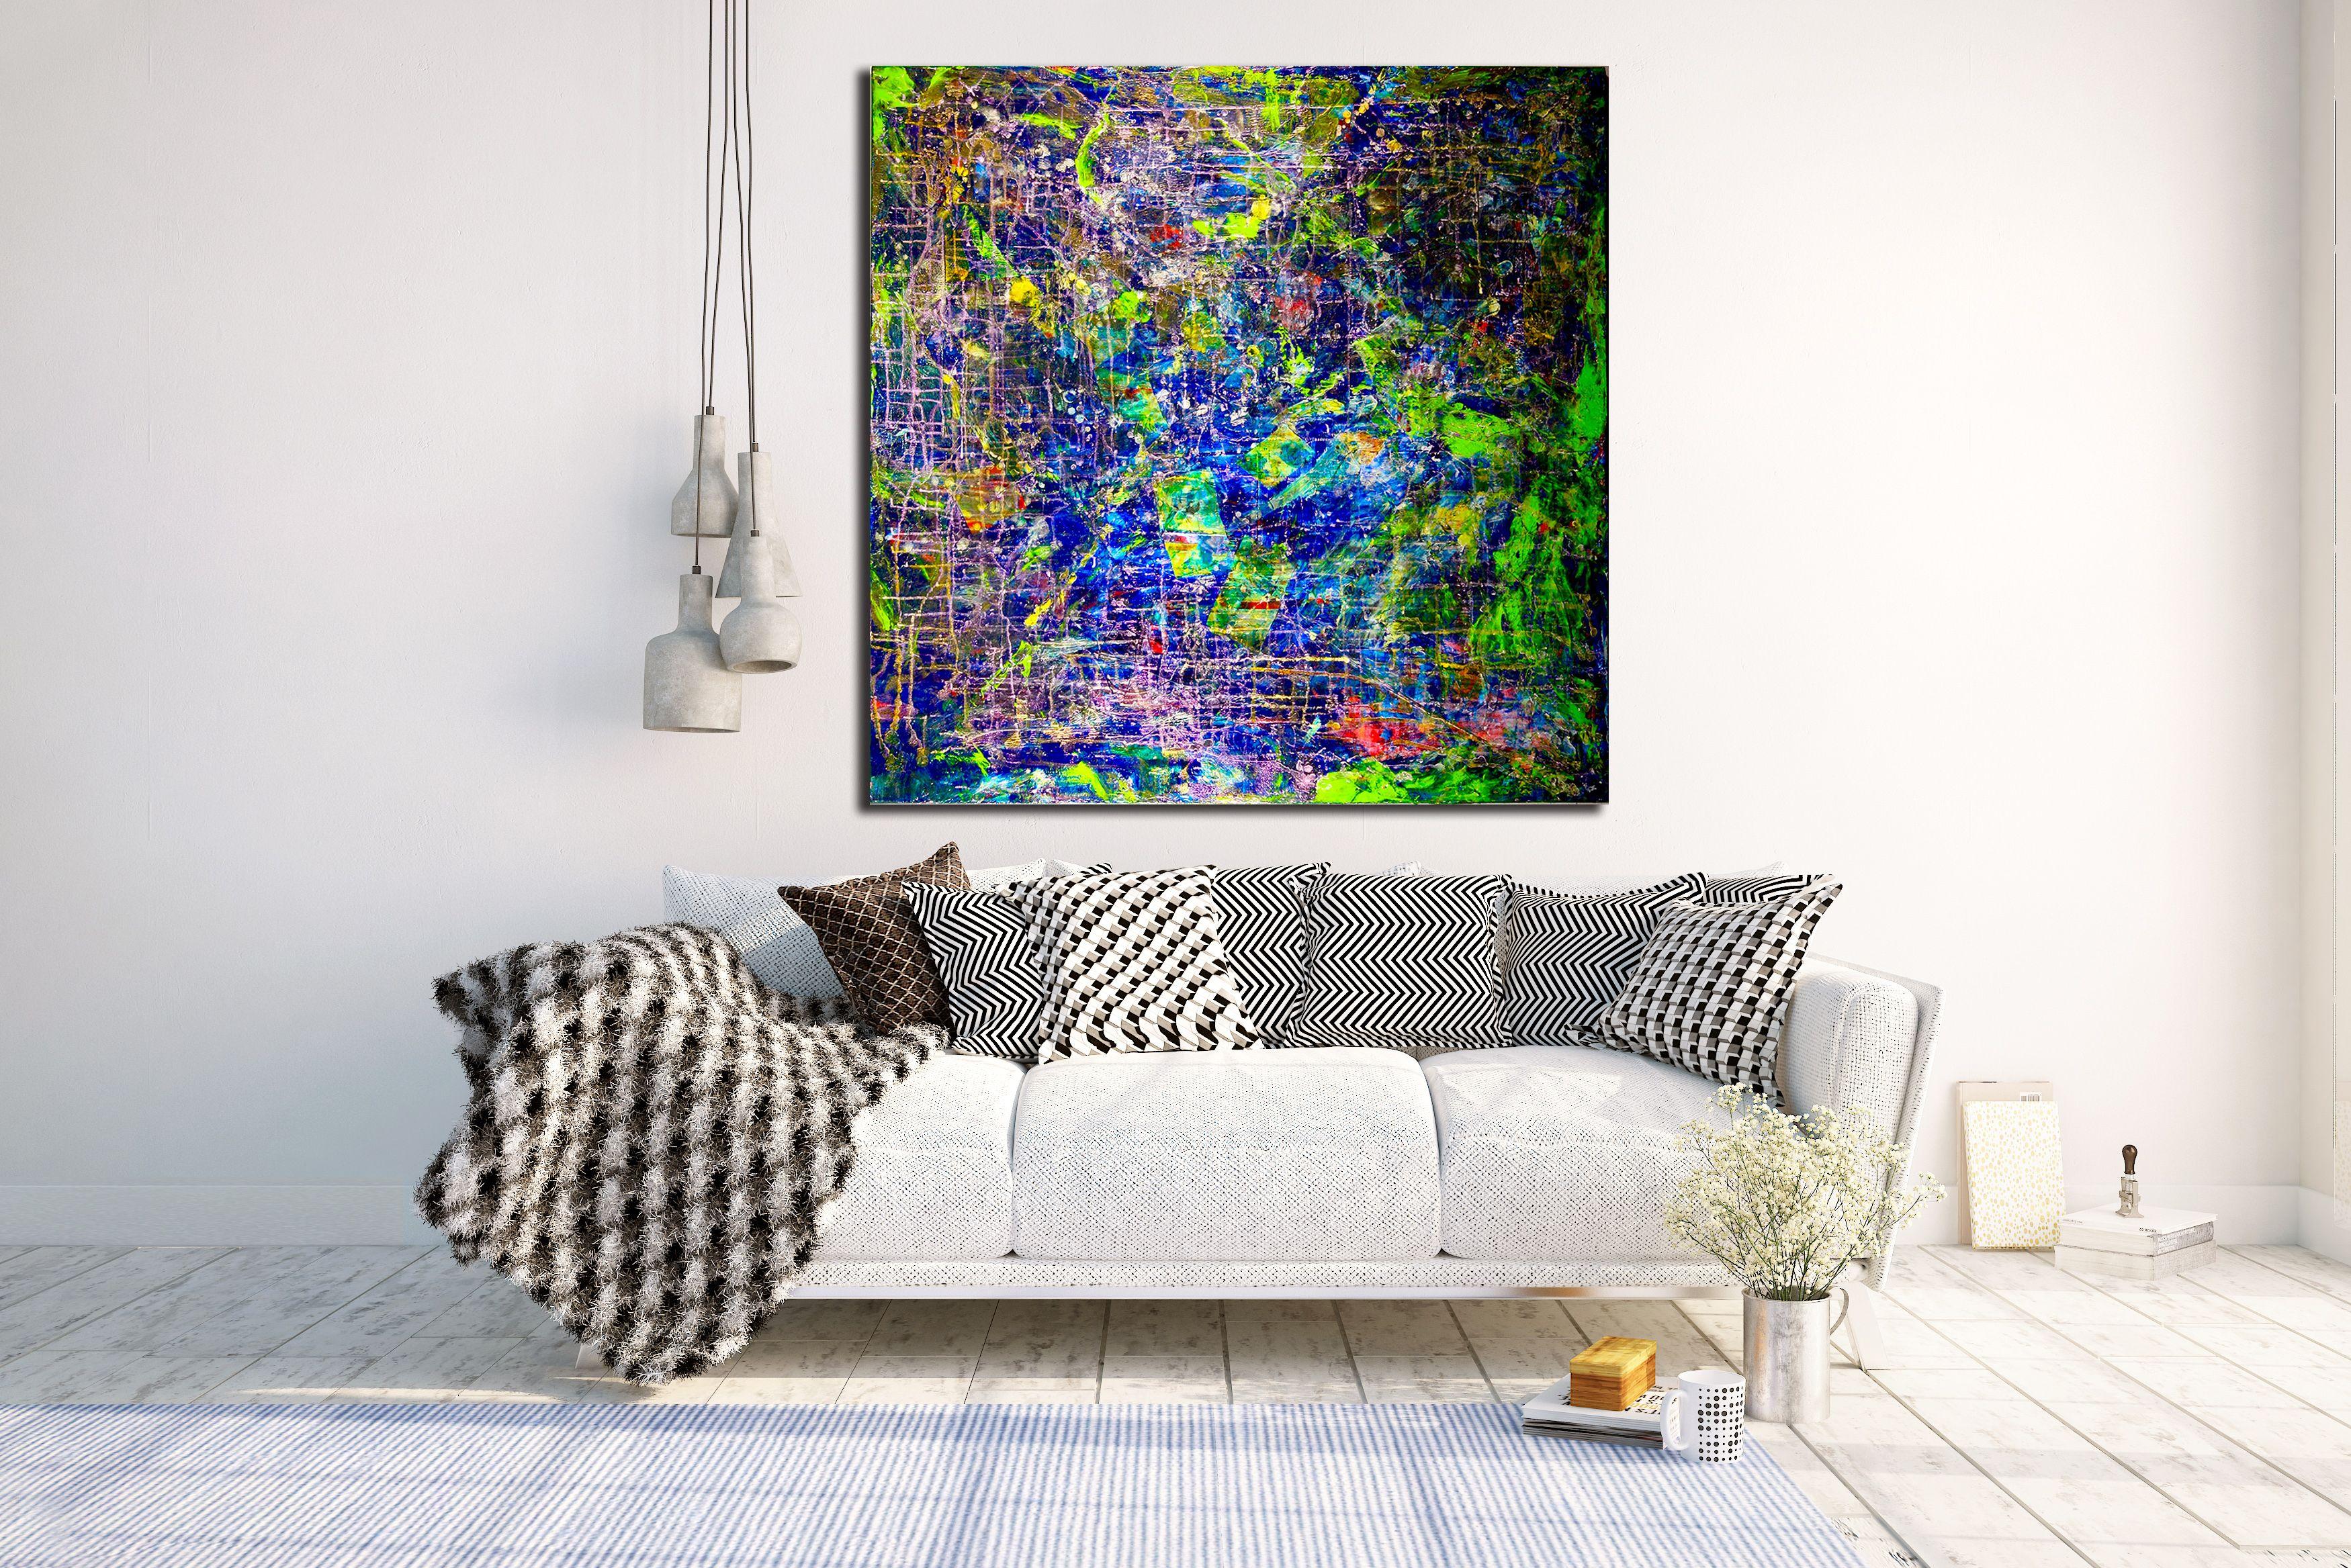 READY TO HANG    - SIGNED CANVAS    - SIGNED CERTIFICATE OF AUTHENTICITY    - BOLD STATEMENT PIECE    Very layered with transparent acrylics paint, ink pouring and brush details. Vibrant painting full of life and action filled. Triple primed canvas